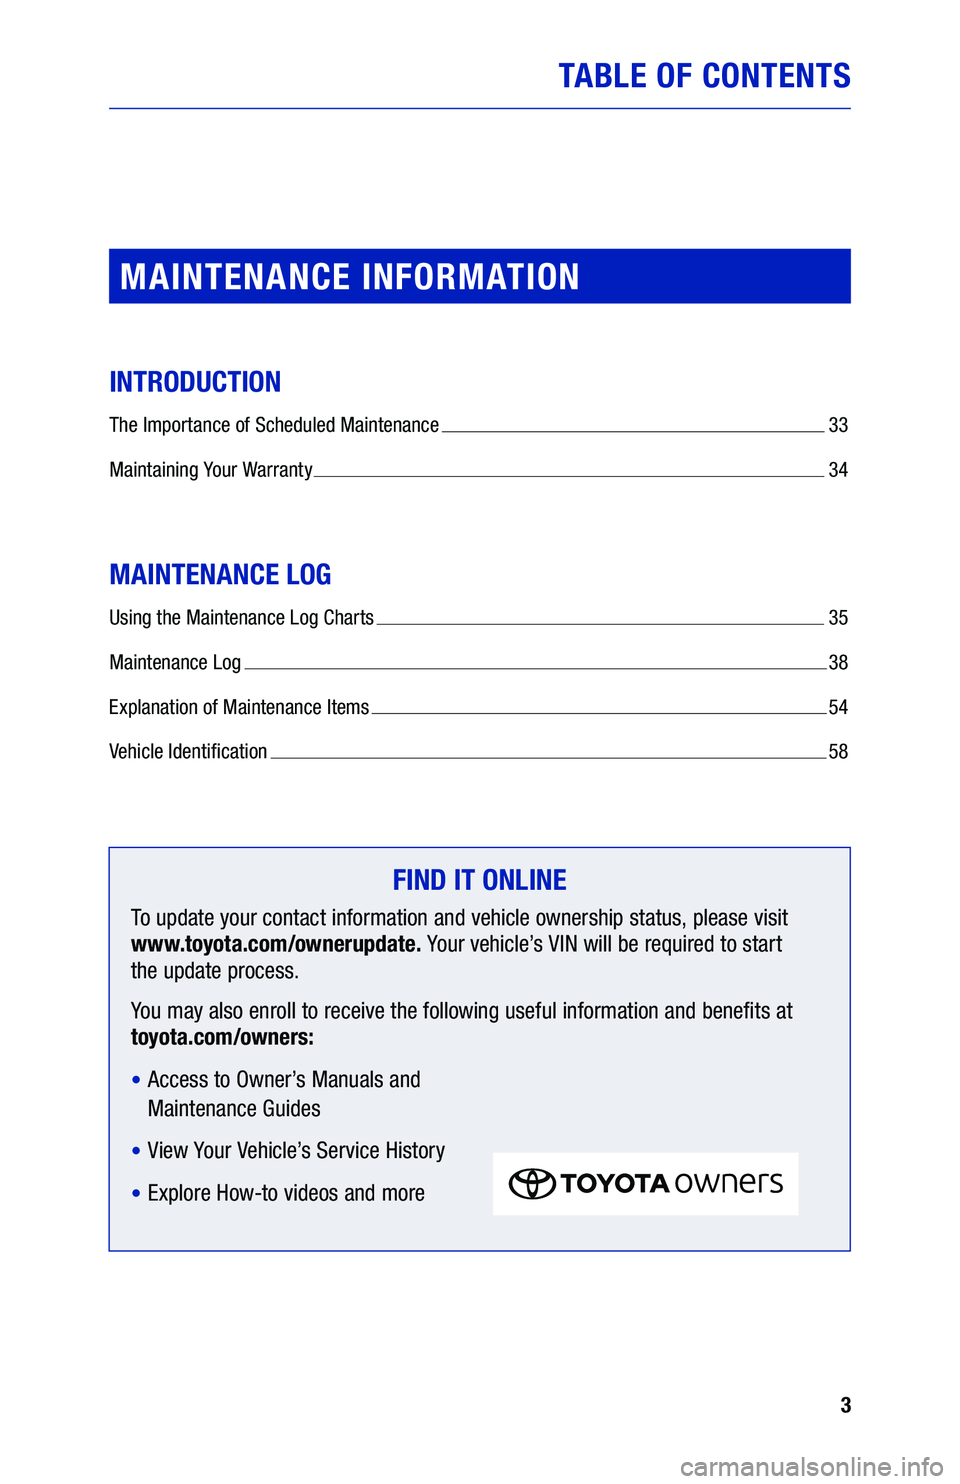 TOYOTA 4RUNNER 2019  Warranties & Maintenance Guides (in English) 3
TABLE OF CONTENTS
MAINTENANCE INFORMATION
INTRODUCTION
The Importance of Scheduled Maintenance  33
Maintaining Your Warranty  34
MAINTENANCE LOG
Using the Maintenance Log Charts  35
Maintenance Log 